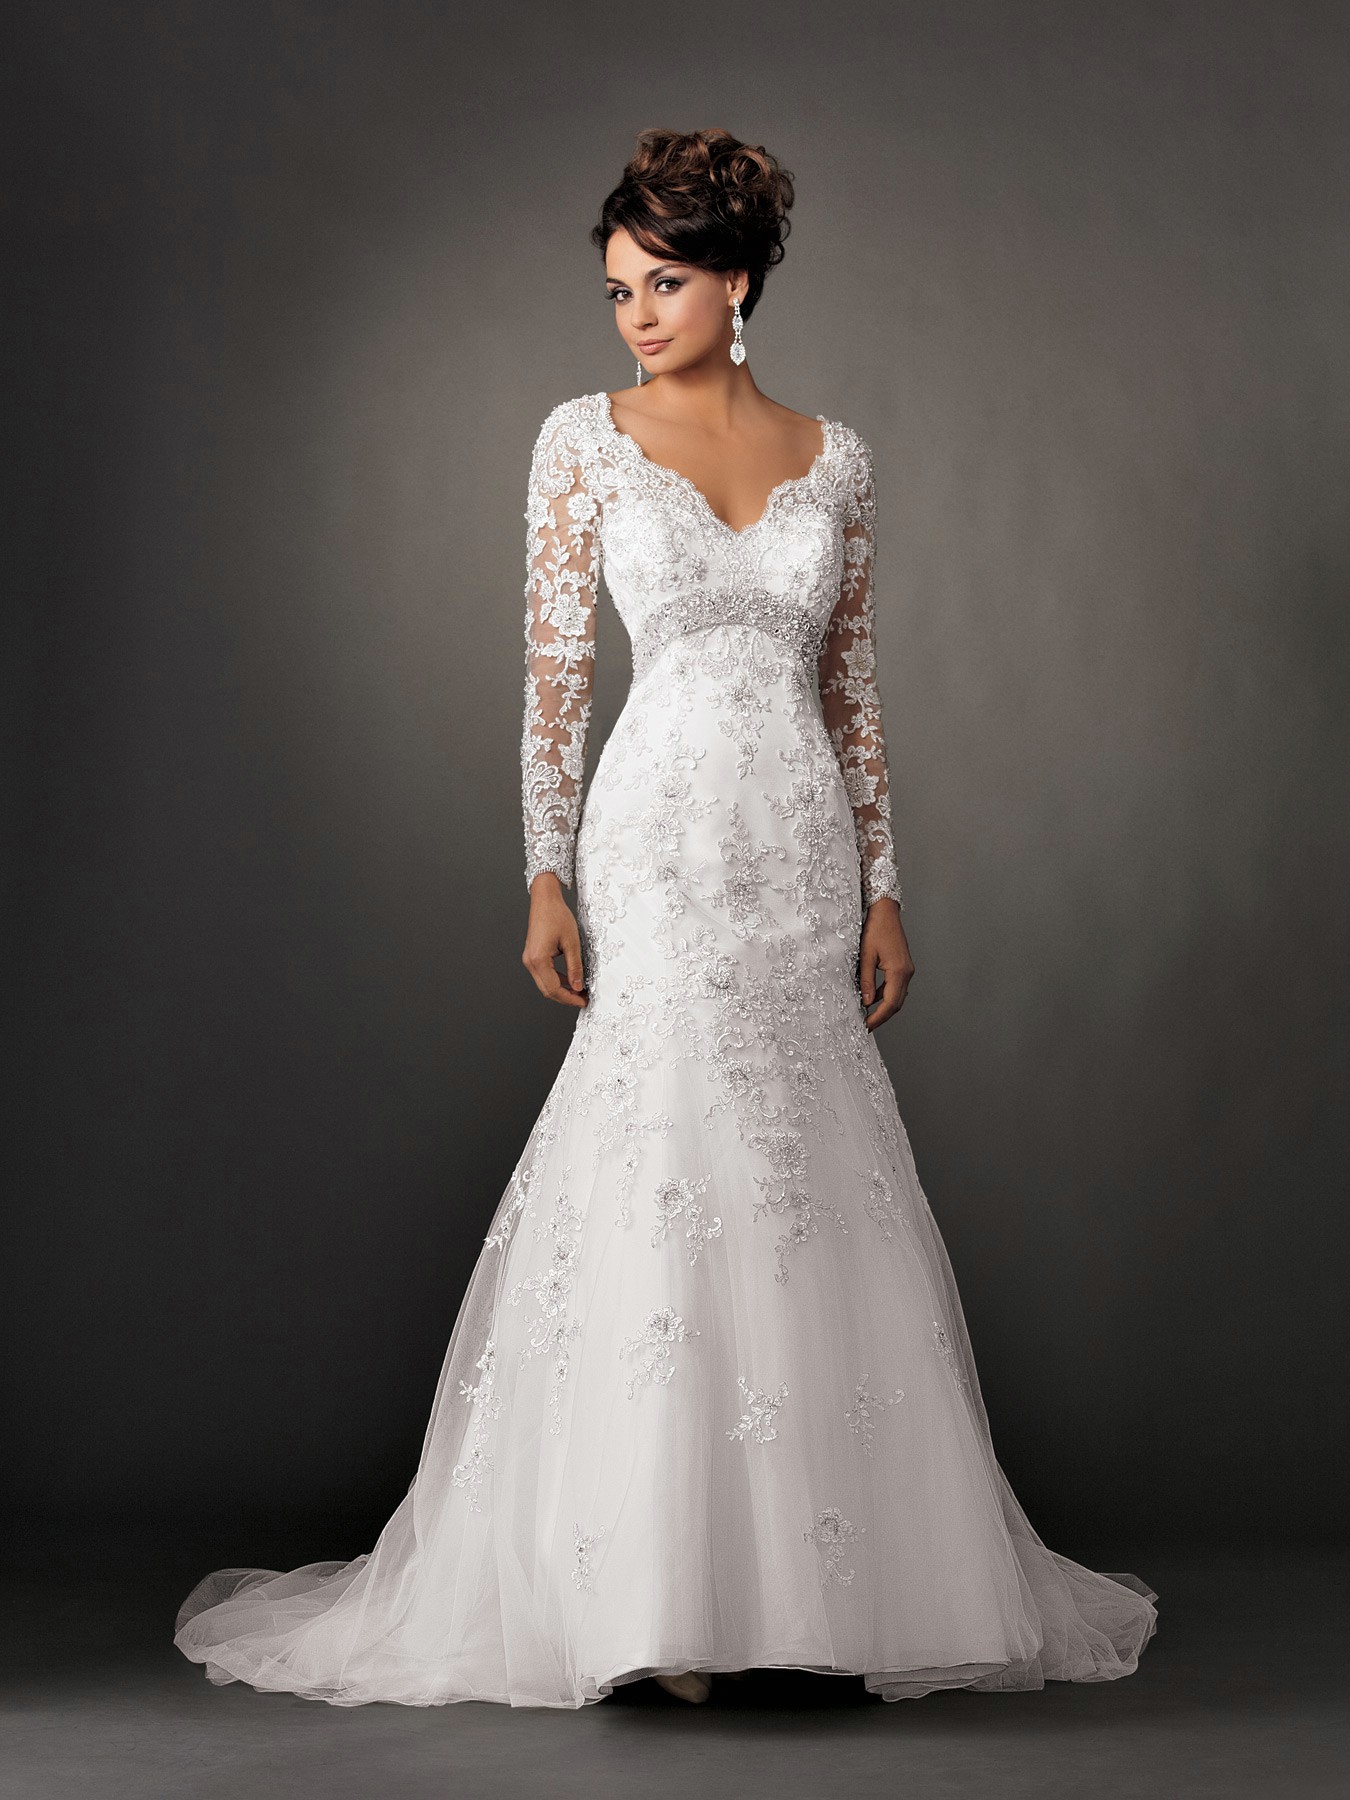 Best Lace Mermaid Wedding Dress of all time Check it out now ...